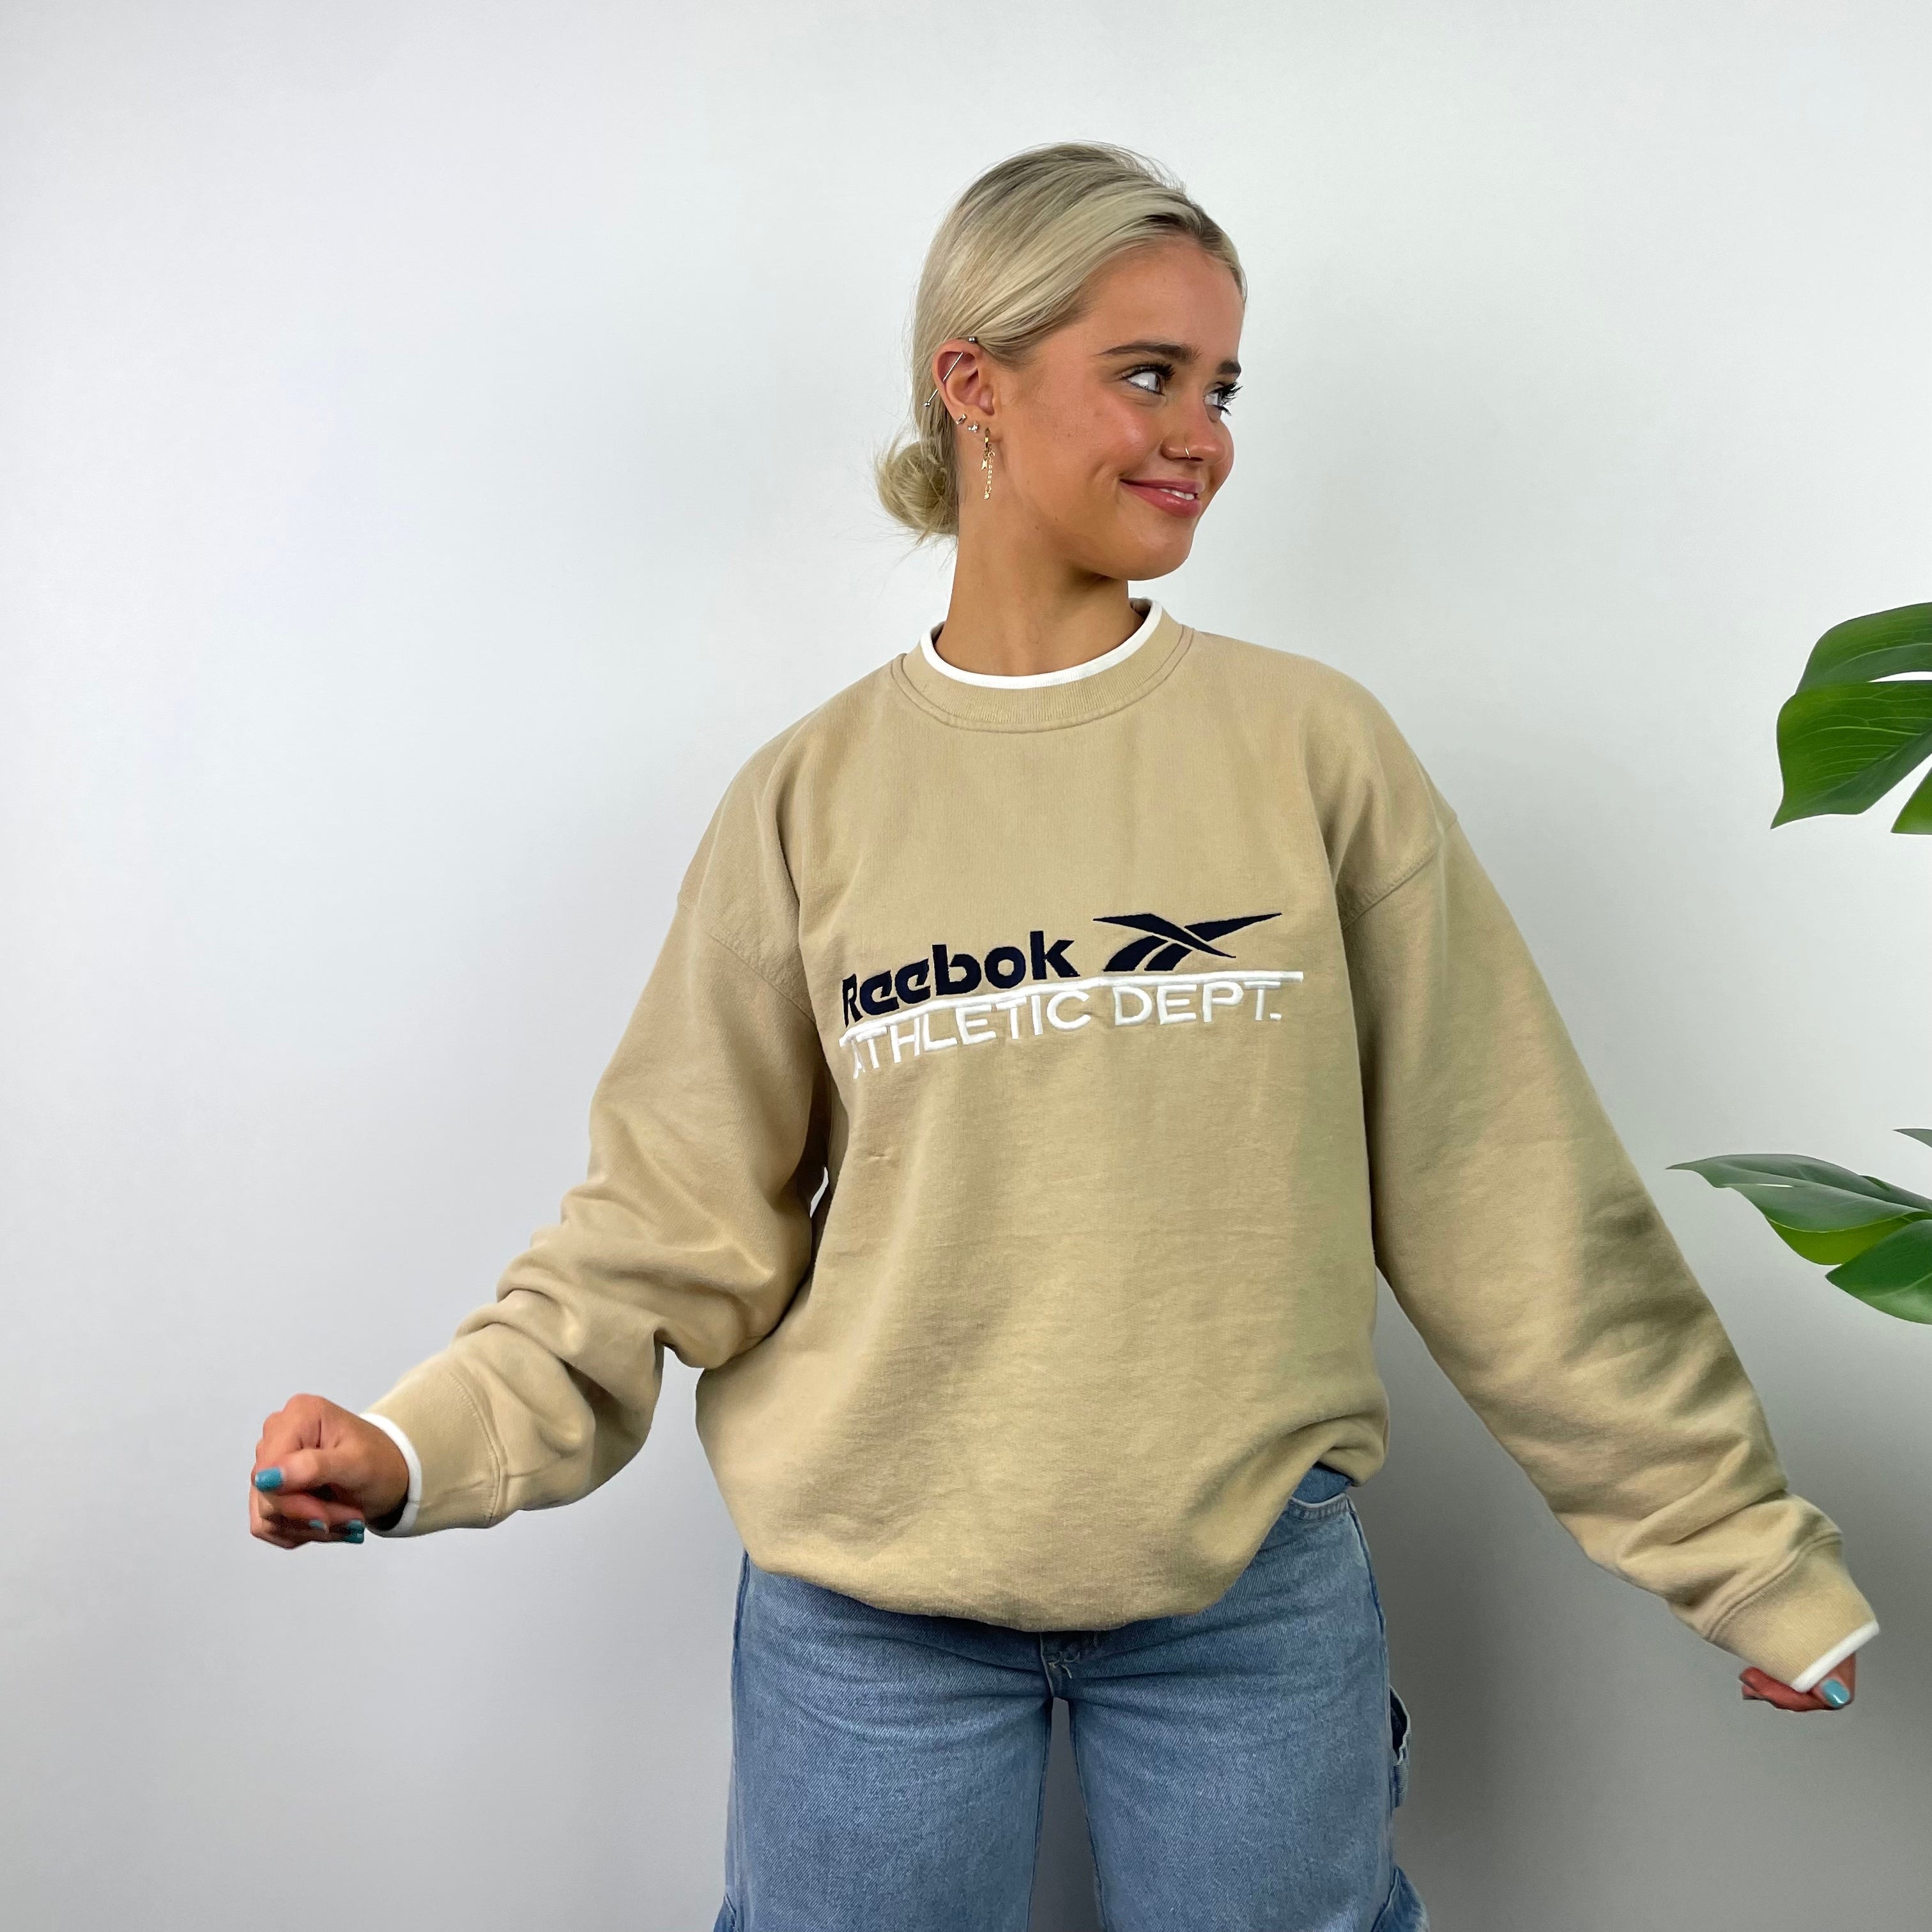 Reebok RARE Tan Beige Embroidered Spell Out Sweatshirt (M)